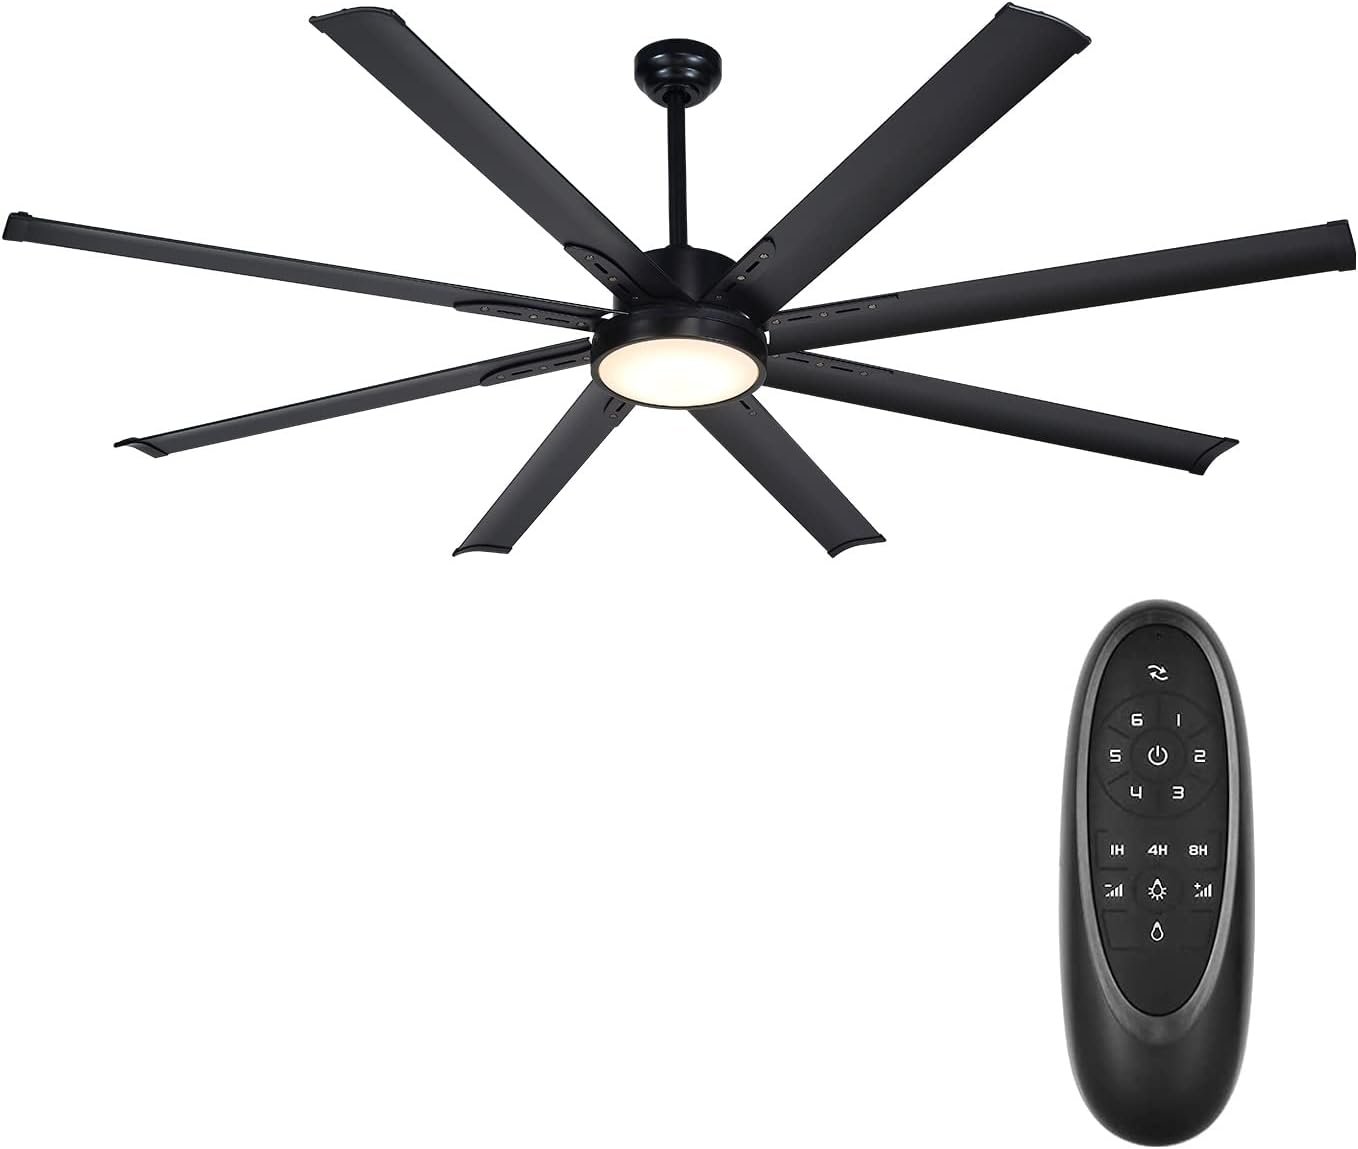 72 Inch Industrial DC Motor Ceiling Fan with LED Light, ETL Listed Damp Rated Indoor or Covered Outdoor Ceiling Fans for Living Room Basement Sunroom Porch Patio, 6-Speed Remote Control, Black